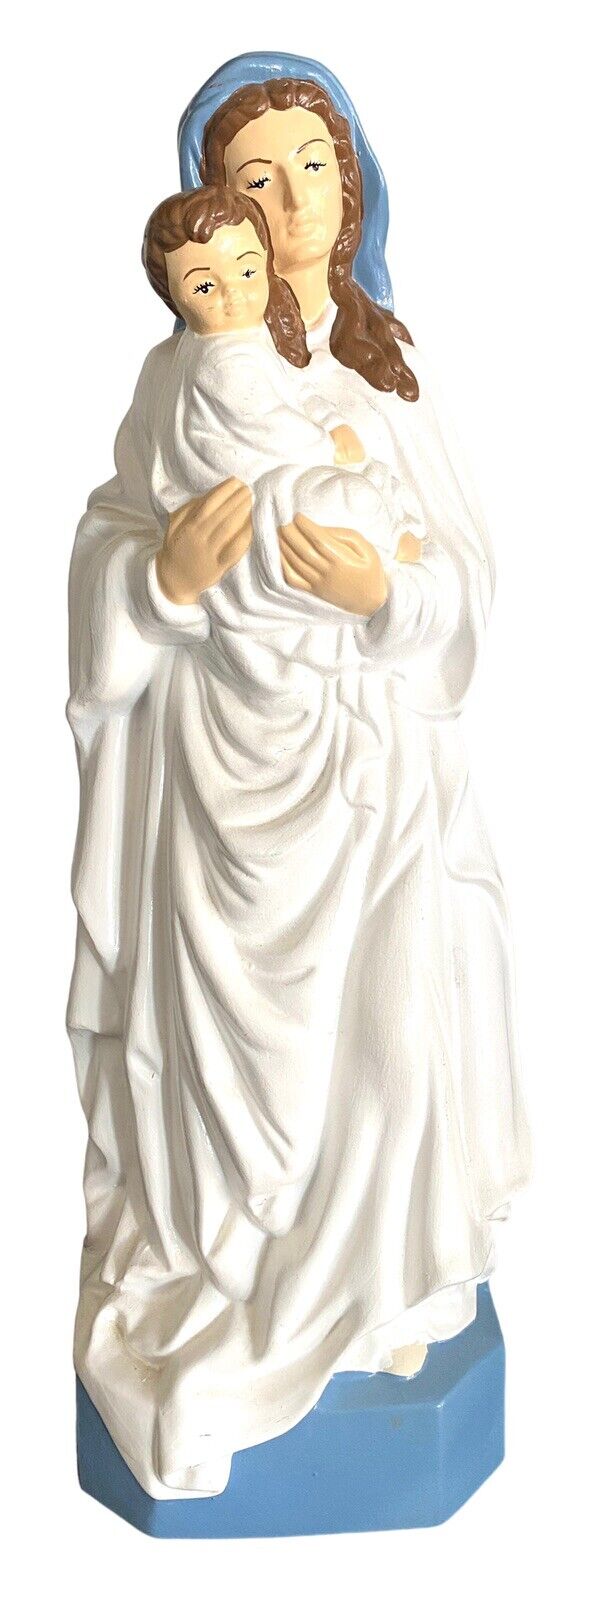 Madonna and Child Statue 13.5 Inch High